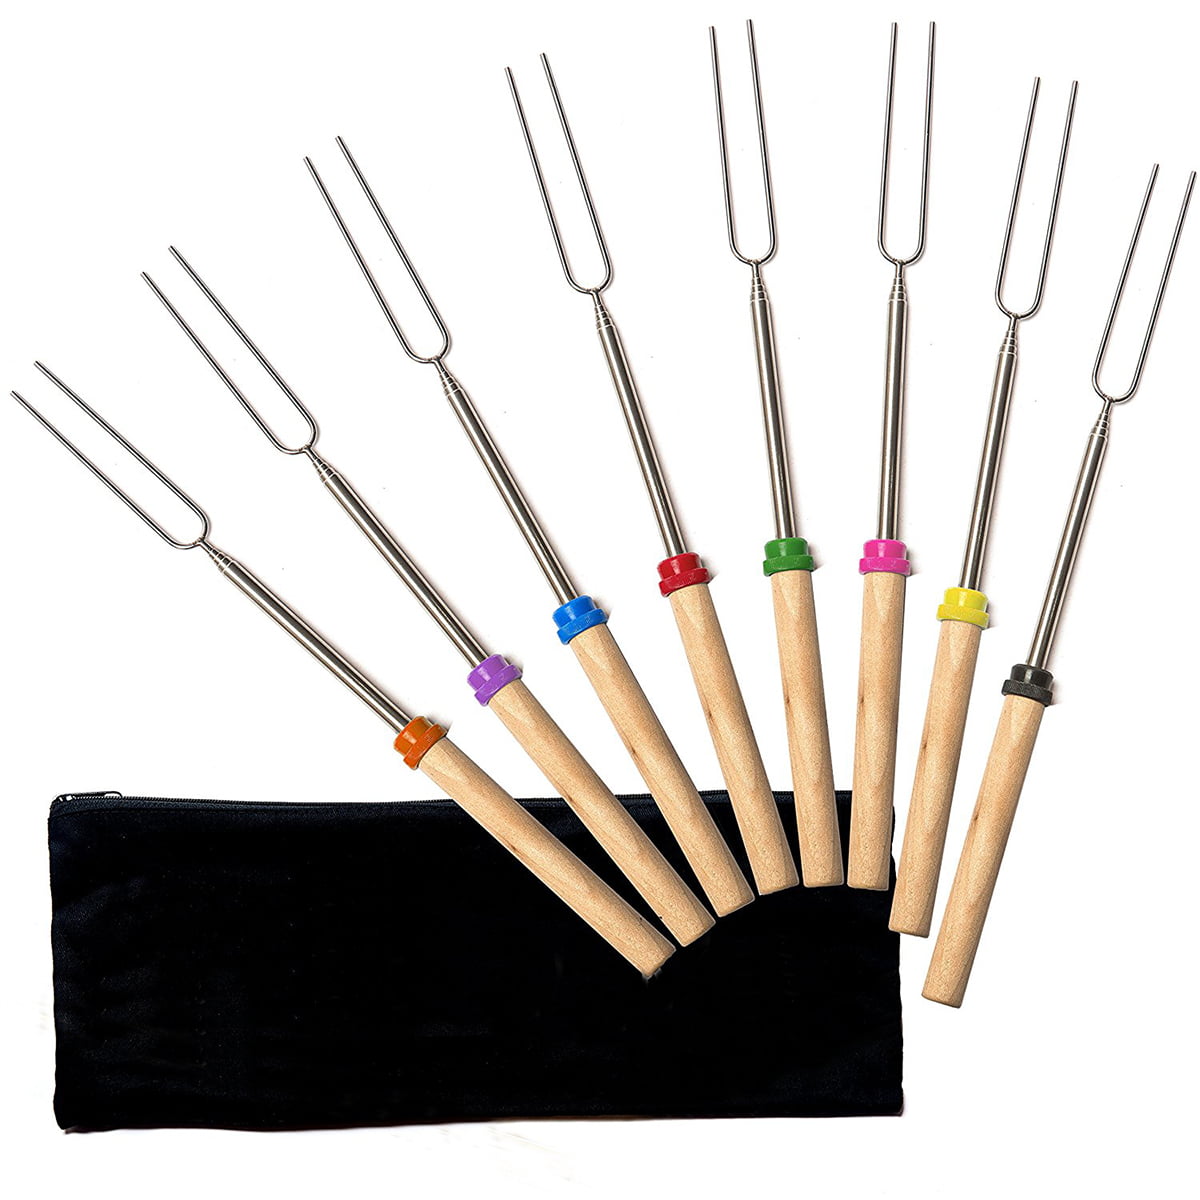 Marshmallow Roasting Sticks 4+4 Retractable Smores Sticks Detachable Skewers Rotating Forks Set of Hot Dog Fire Pit Outdoor Fireplace Campfire Accessories Extendable Steel Fork Camping Kit 